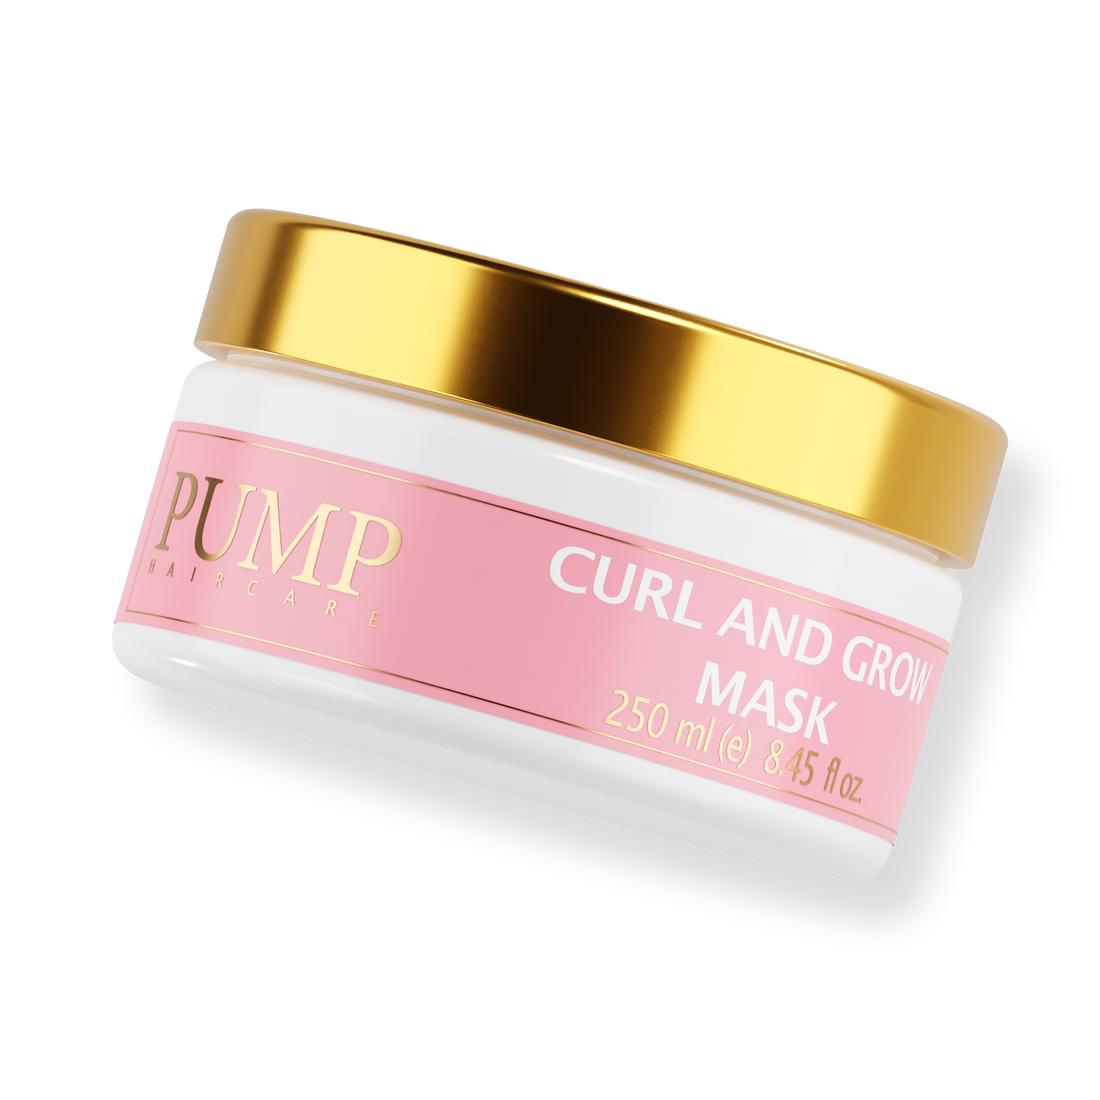 Pump Curl and Grow Mask